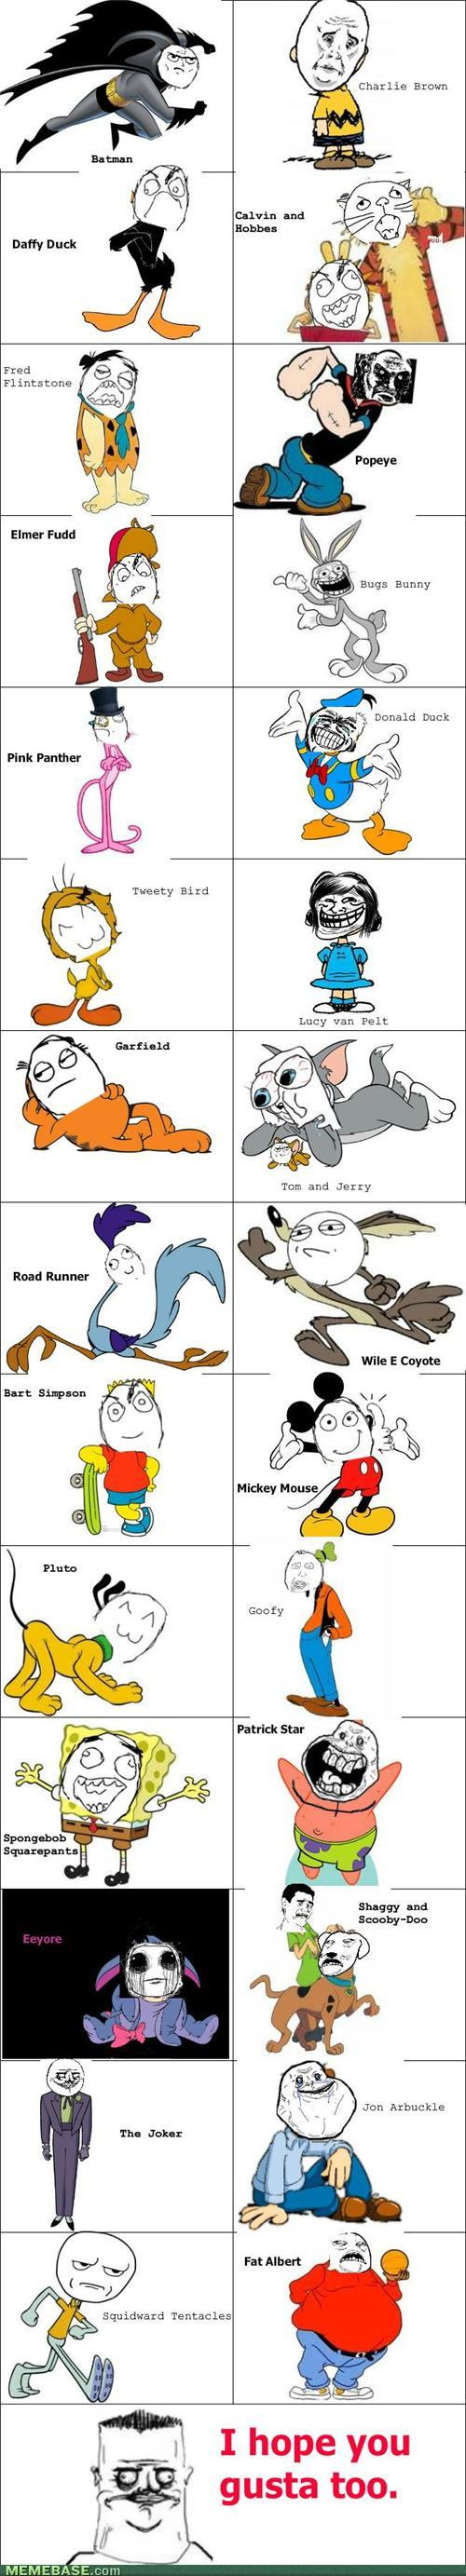 Cartoon characters with meme rage faces